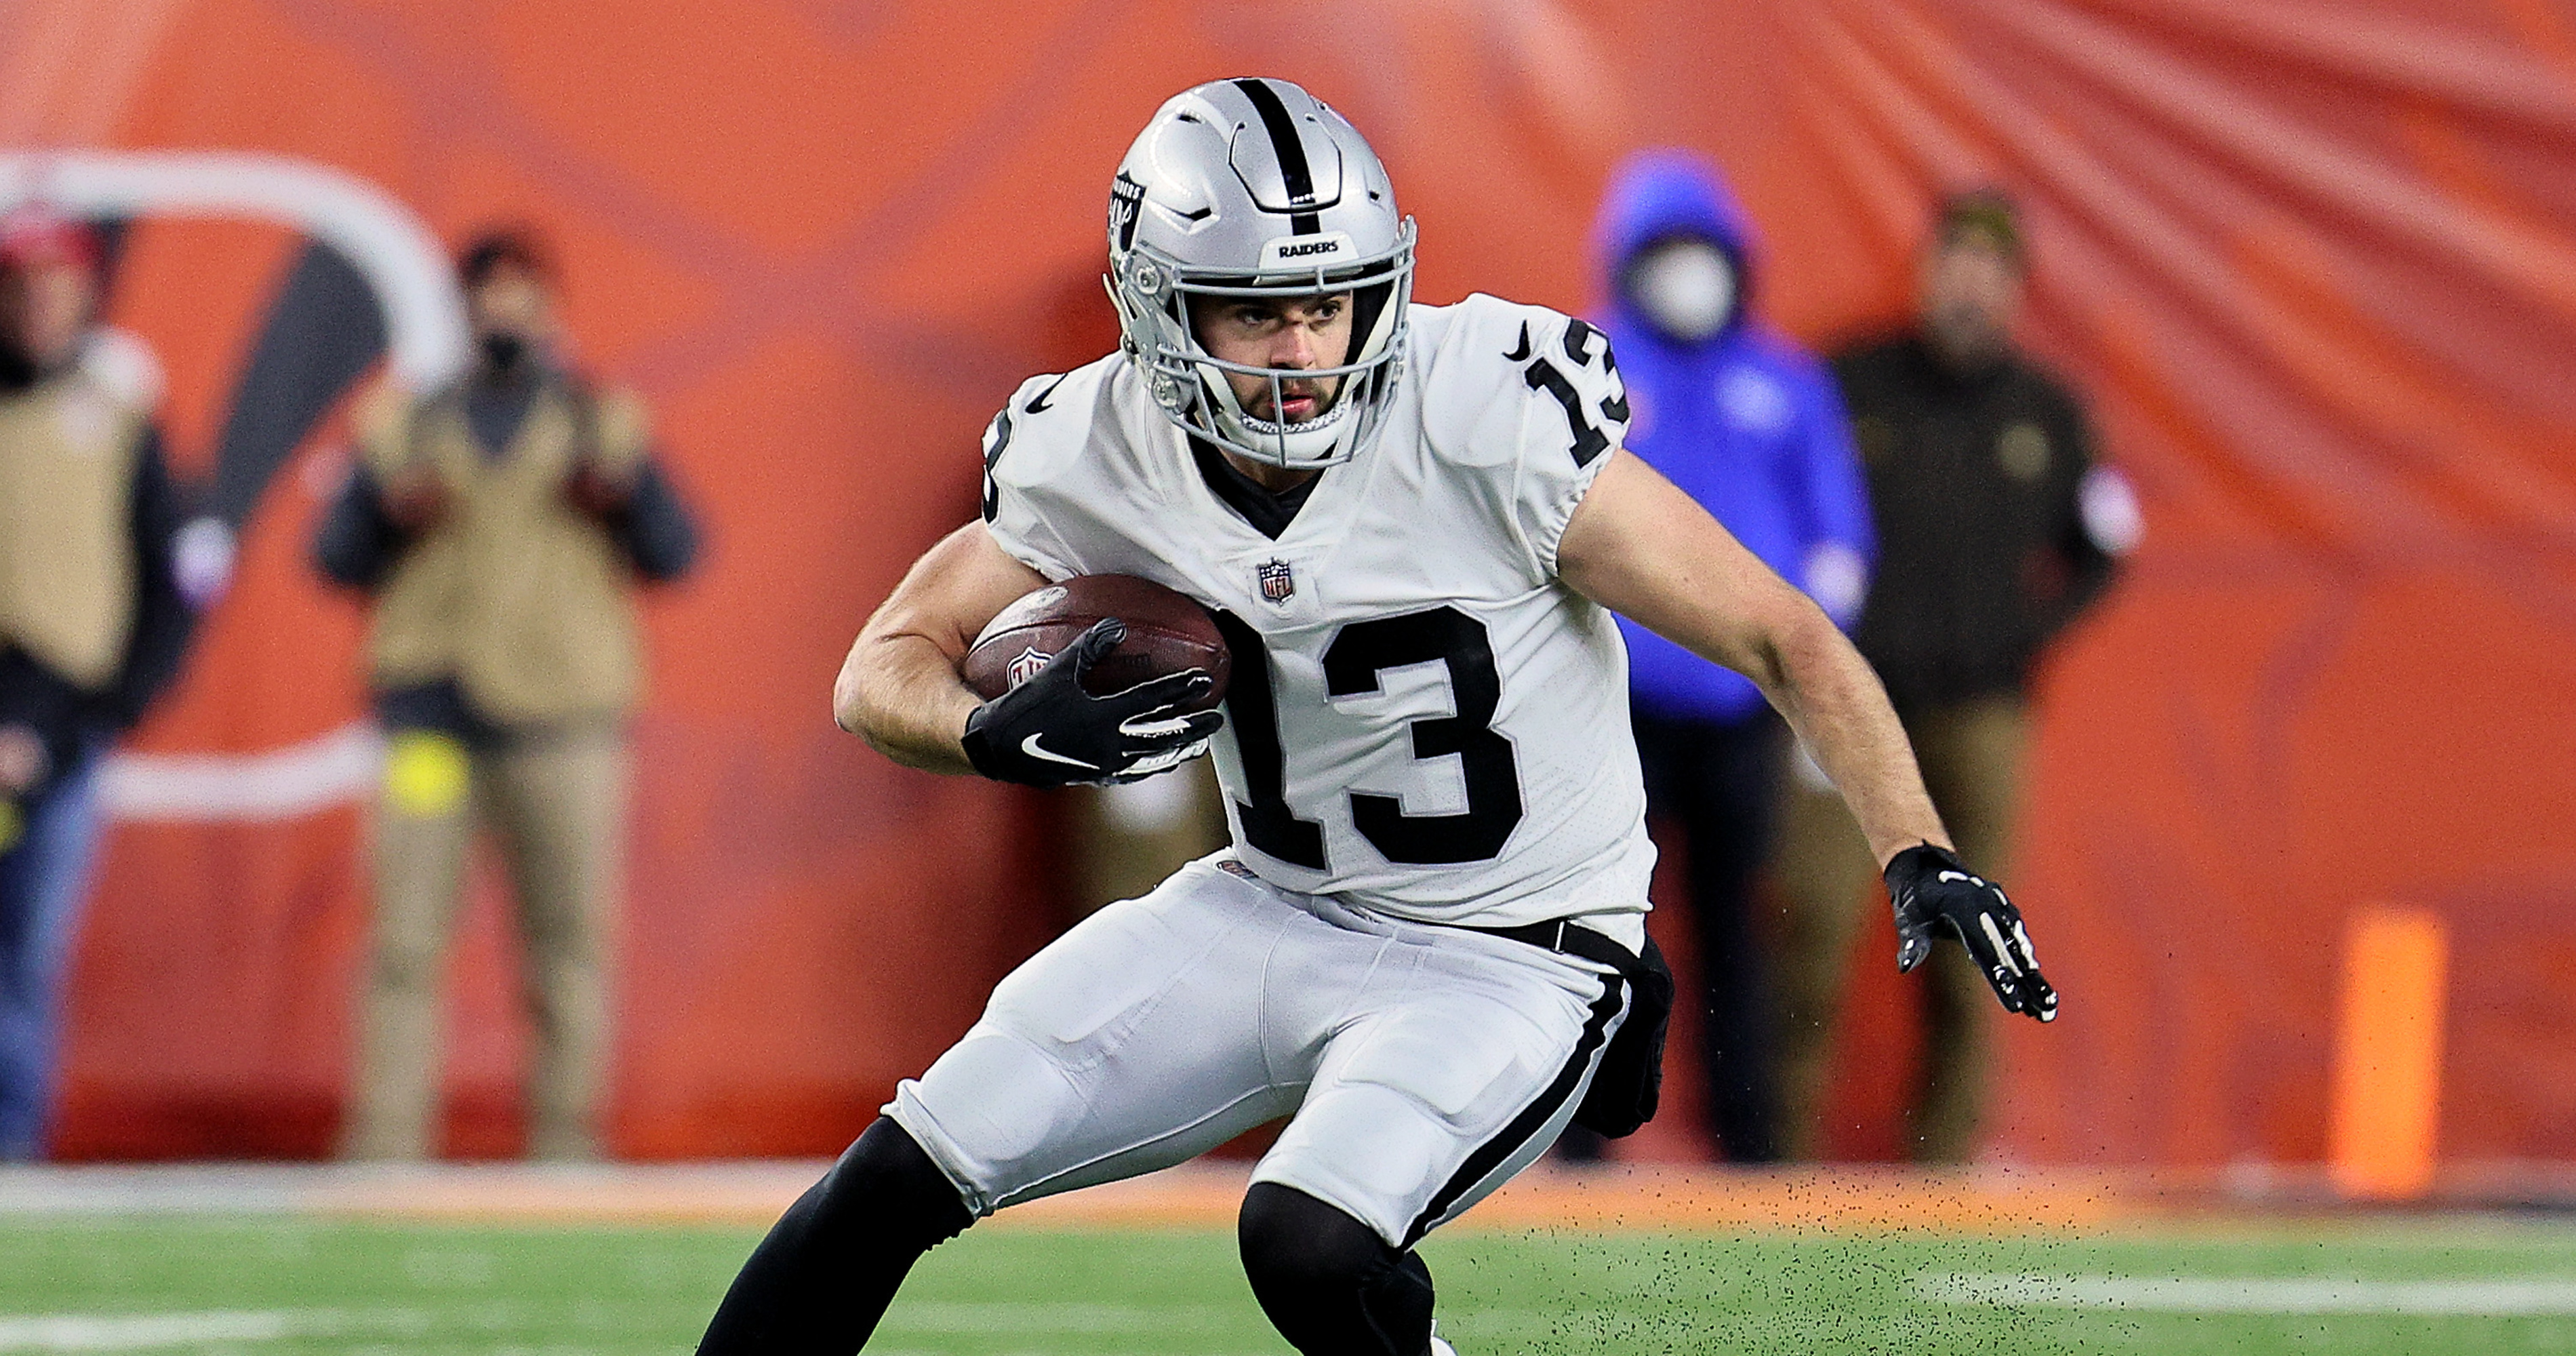 Should you select Hunter Renfrow in fantasy drafts?